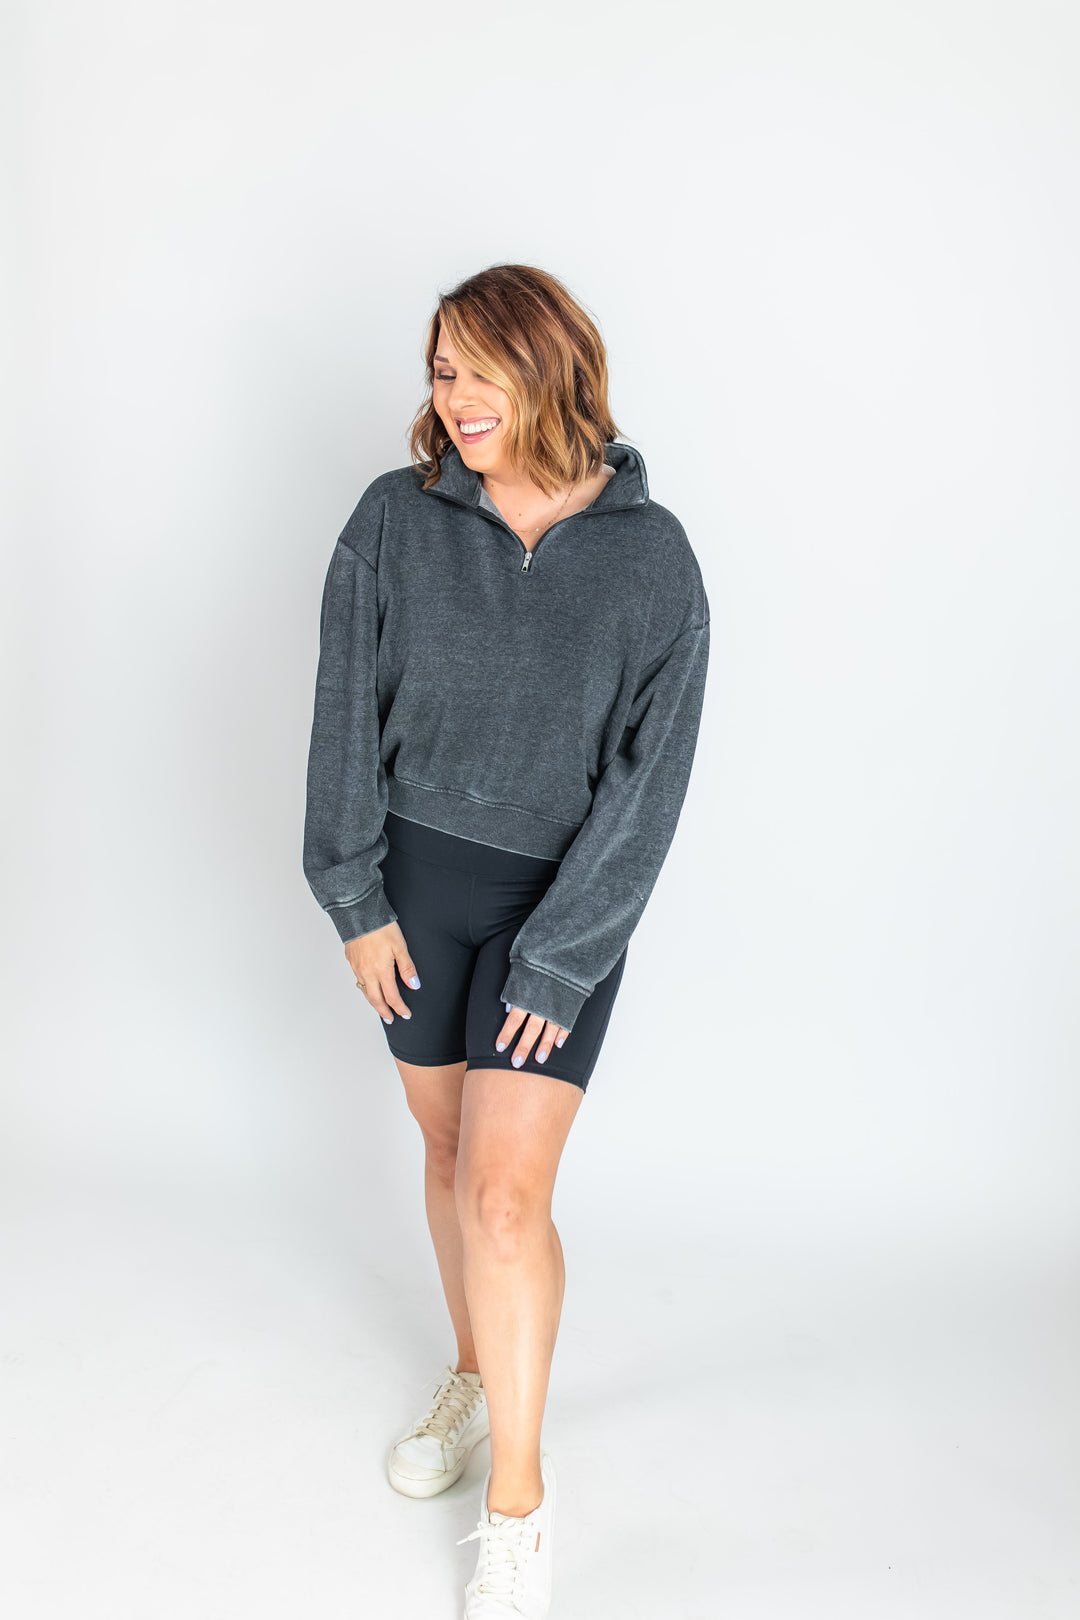 The Easy Days Pullover